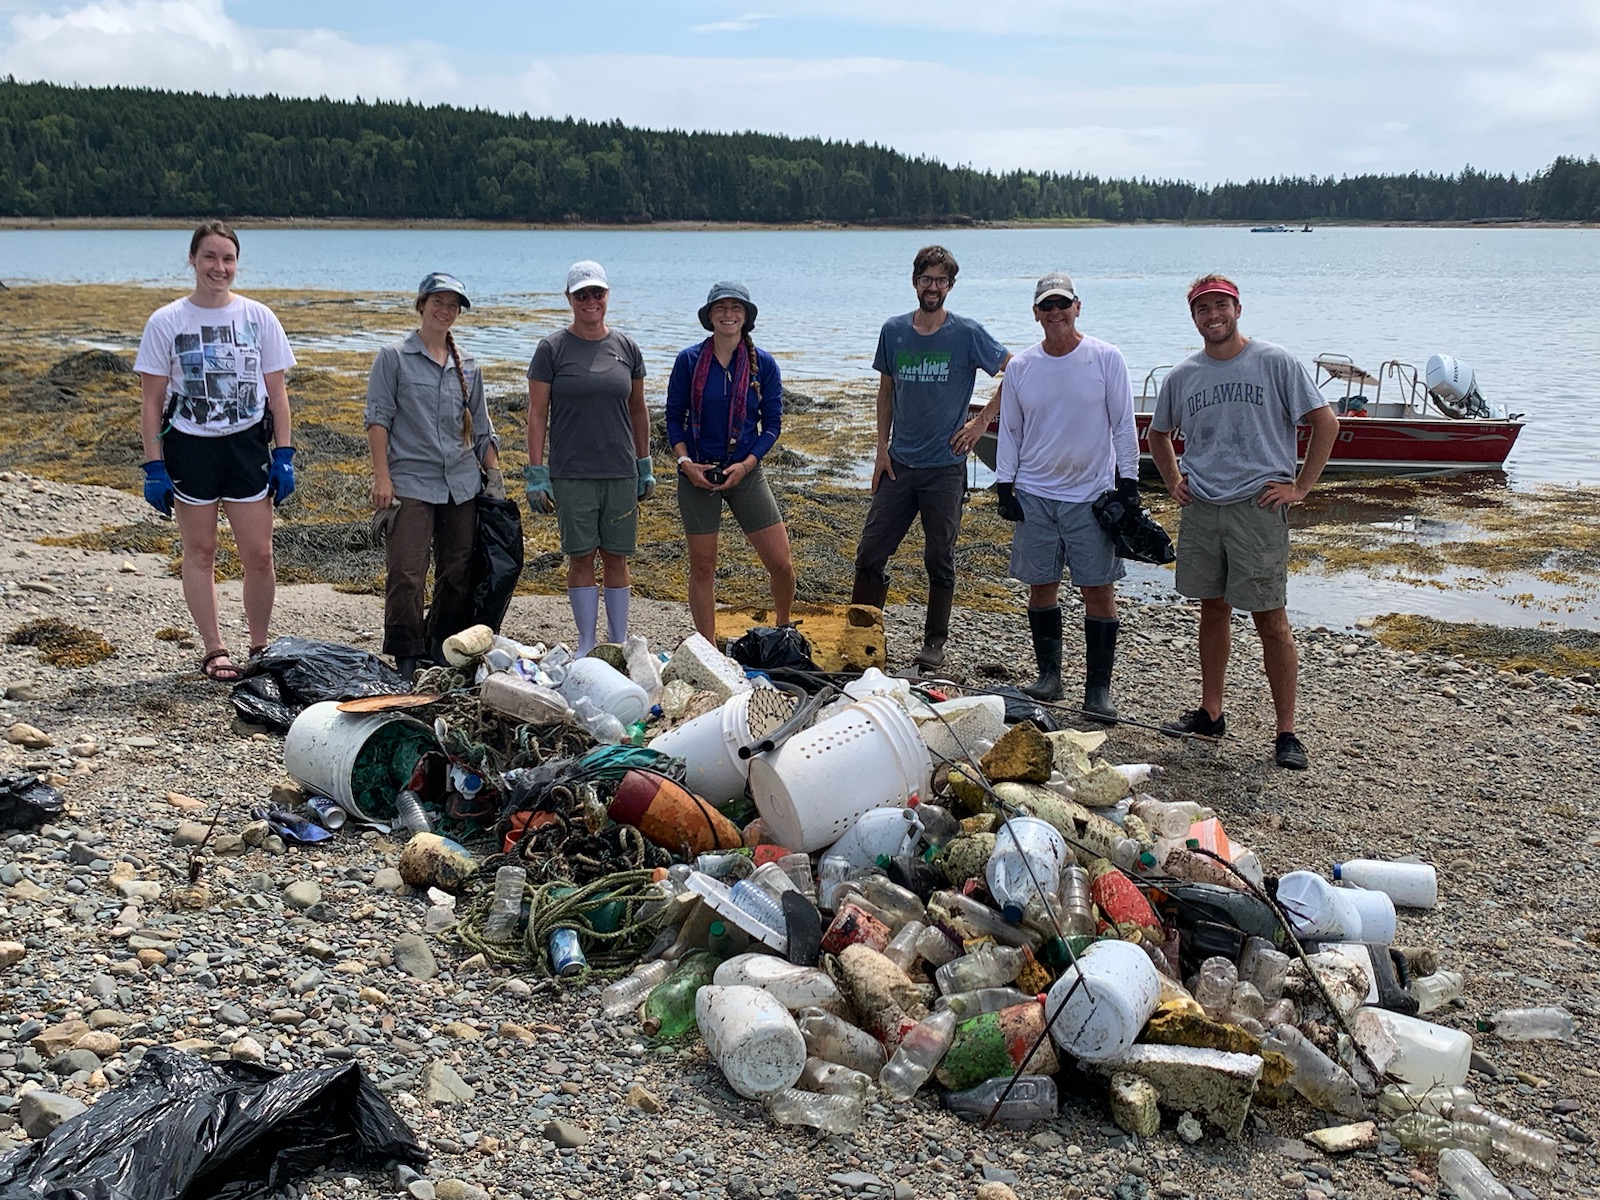 Remote Island Cleanup at Roque Bluffs with Maine Island Trail Association